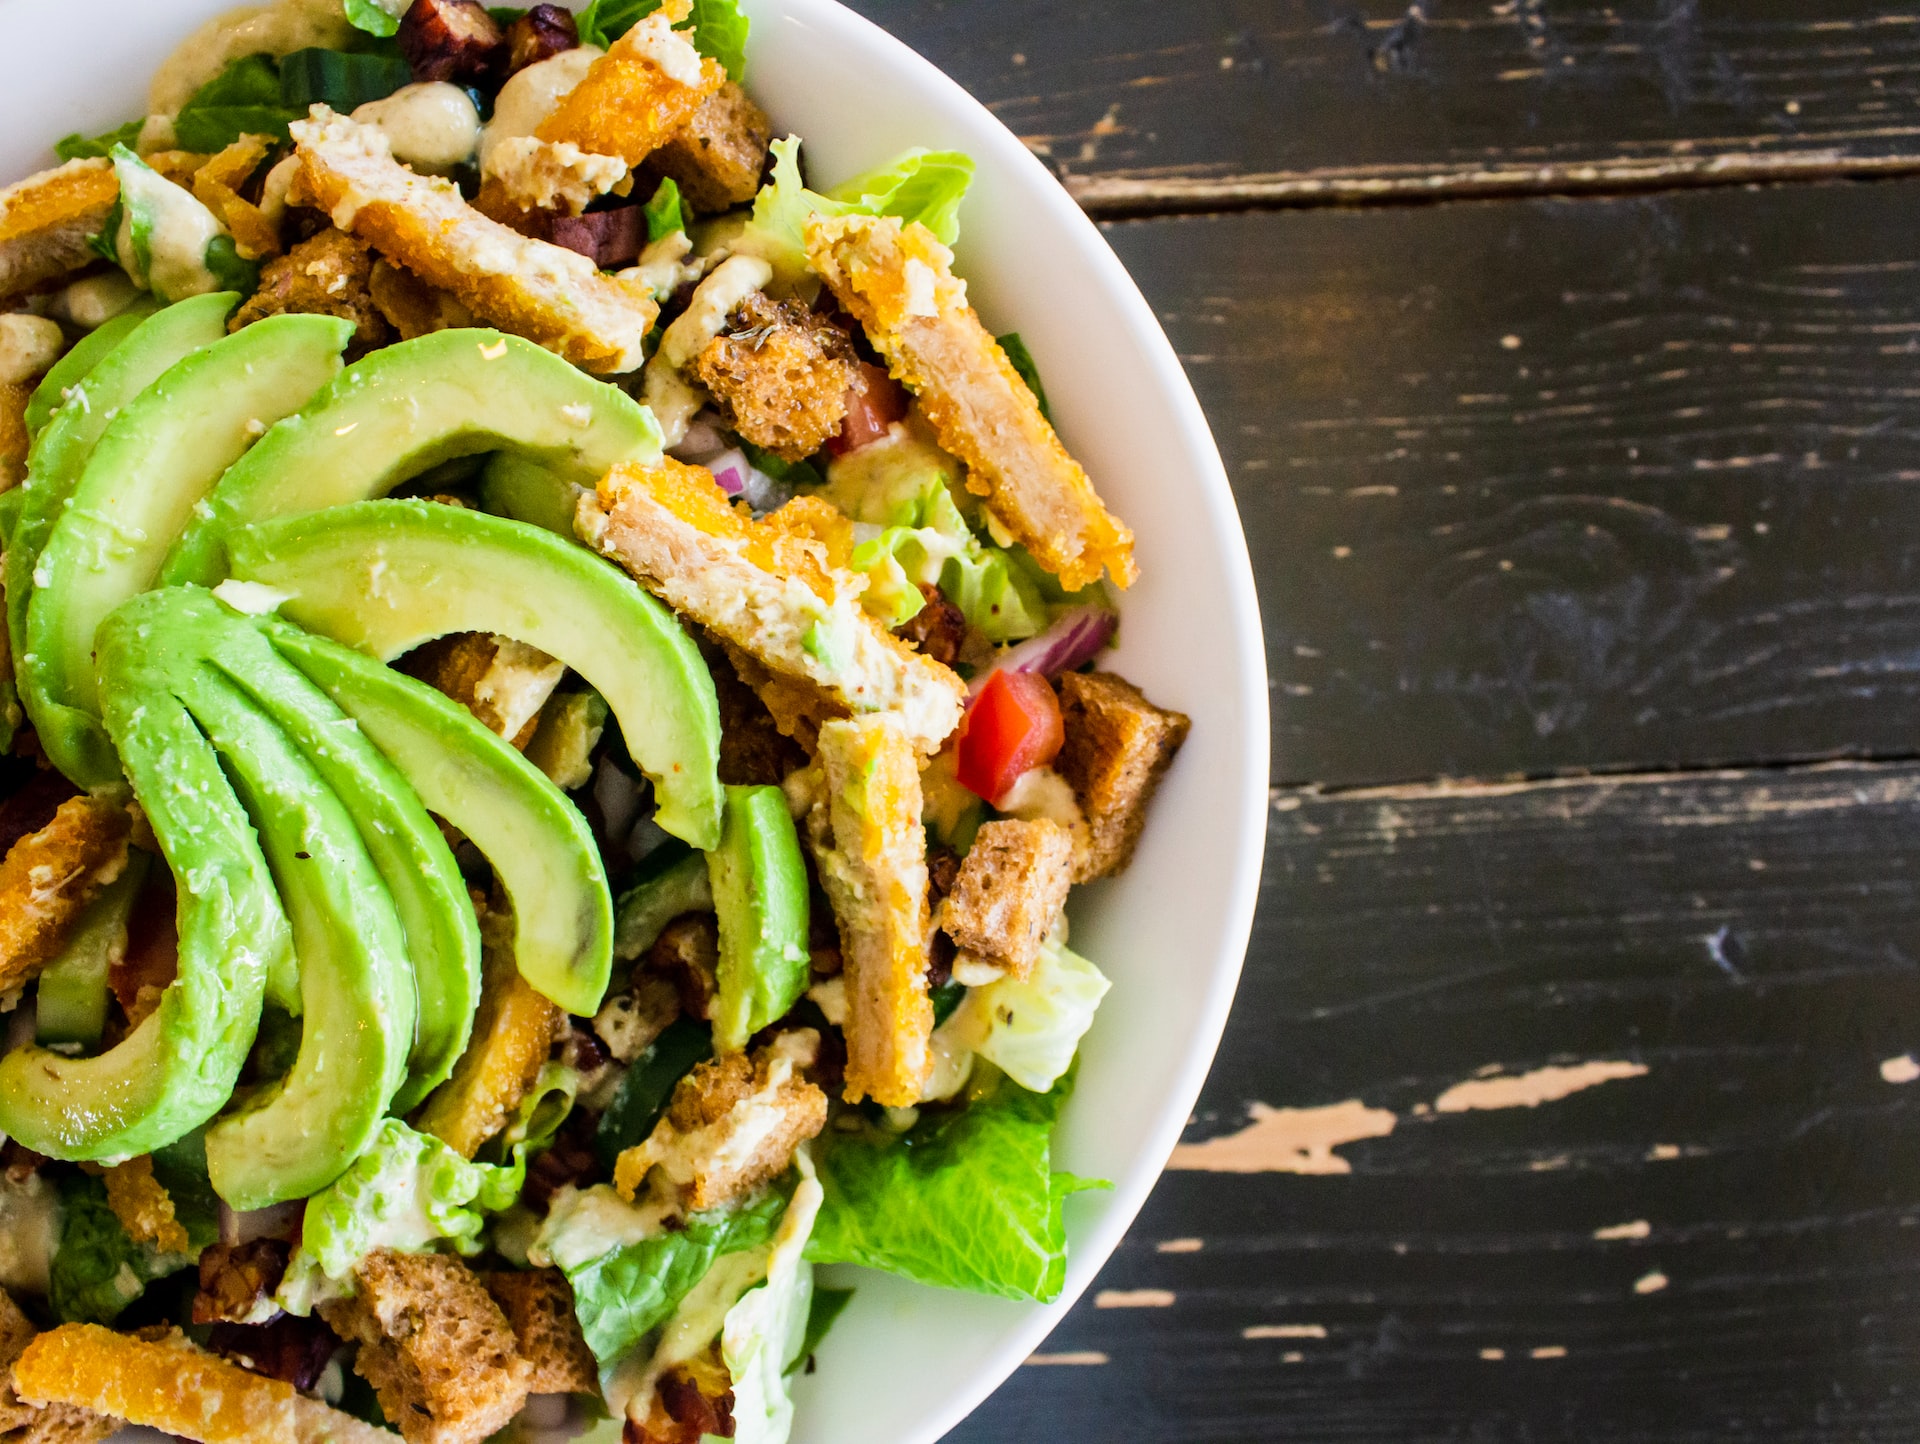 Close up of a salad with chicken, avocado, peppers, and croutons.